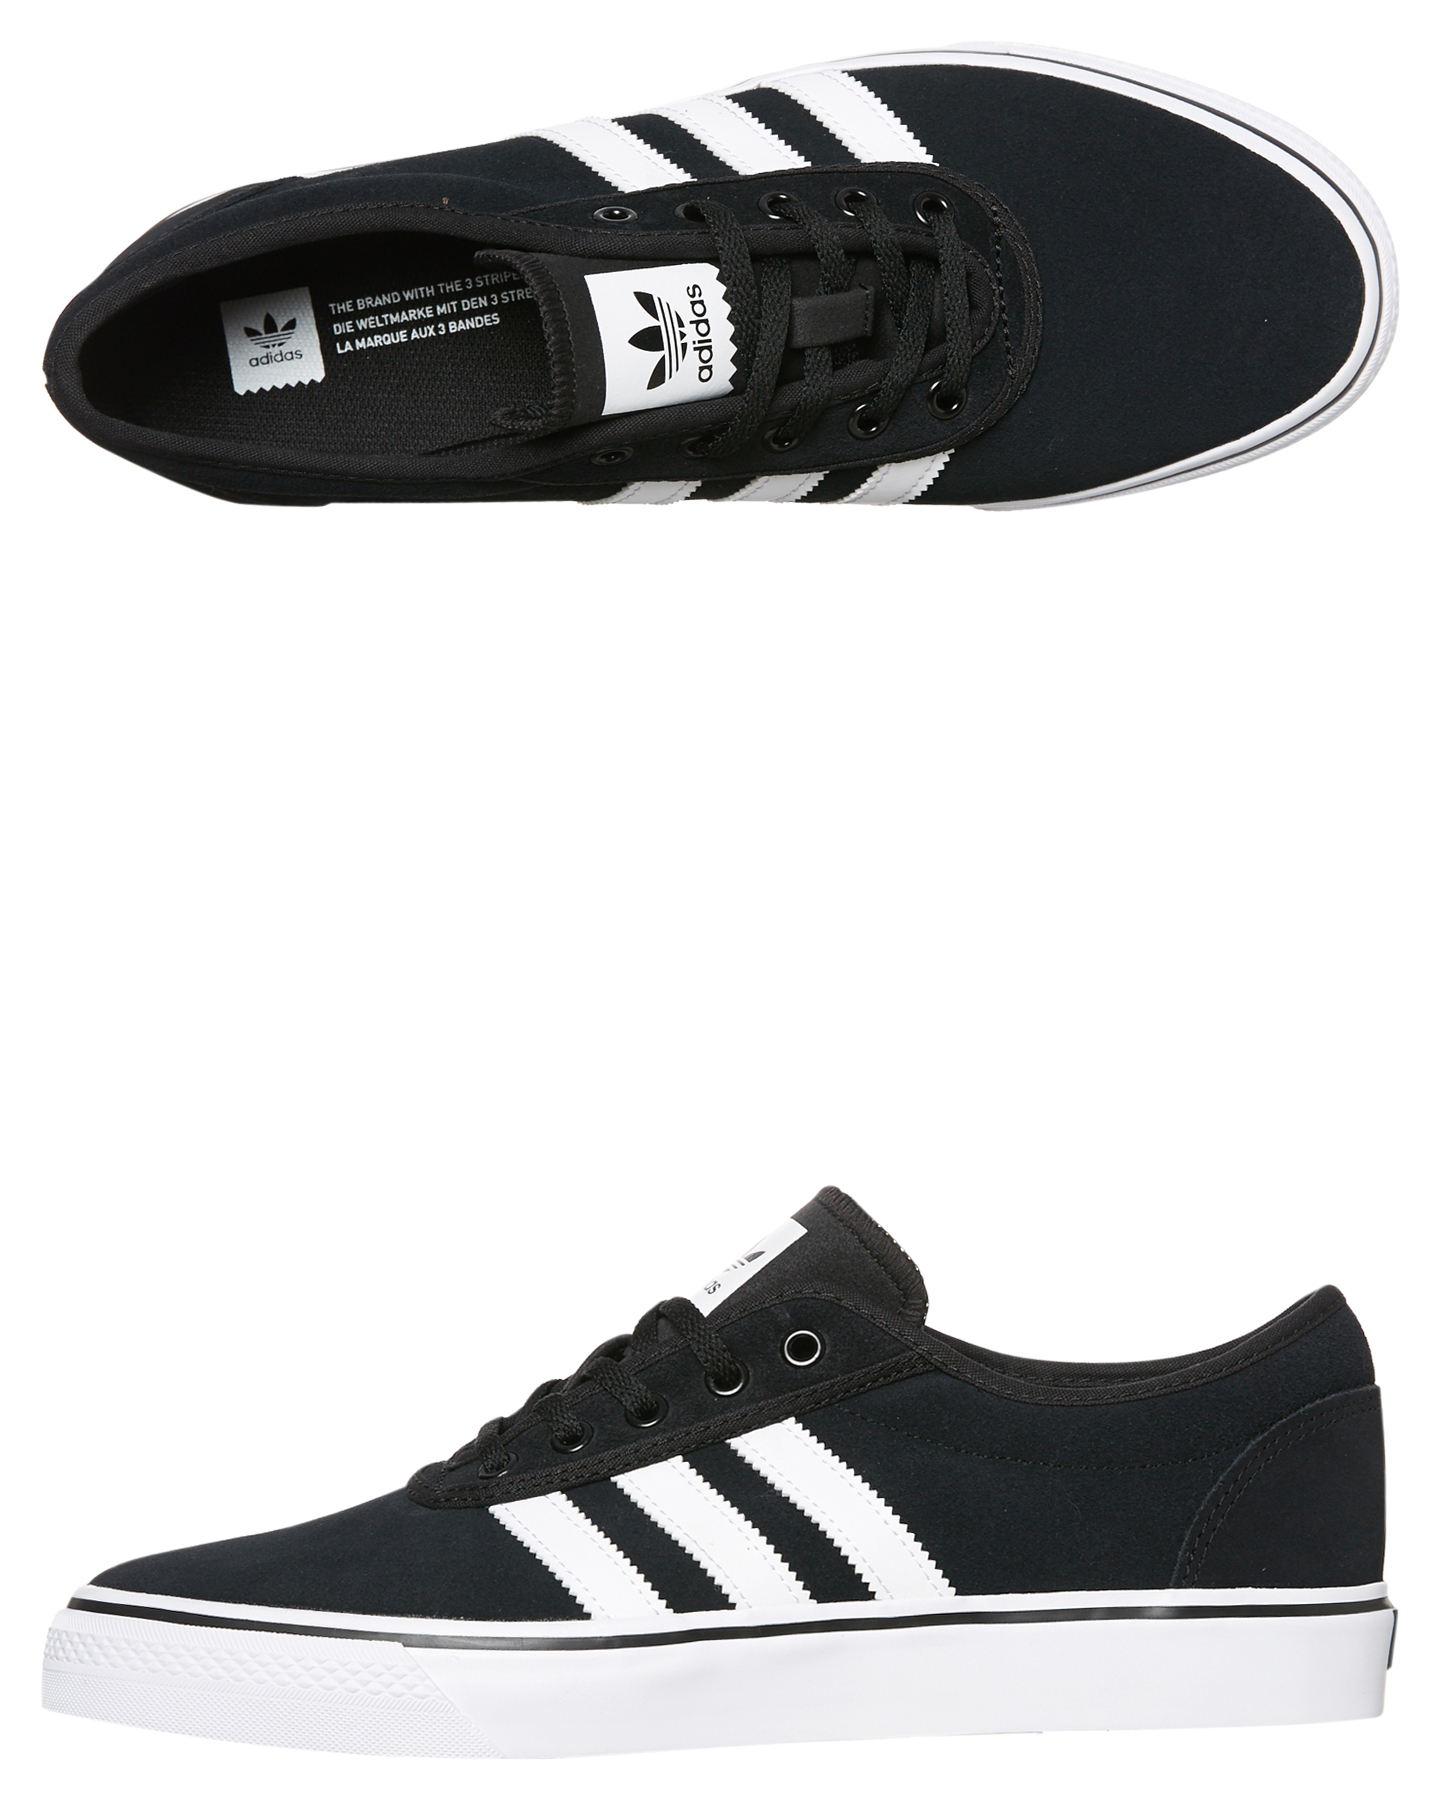 adidas the brand with the 3 stripes scarpe